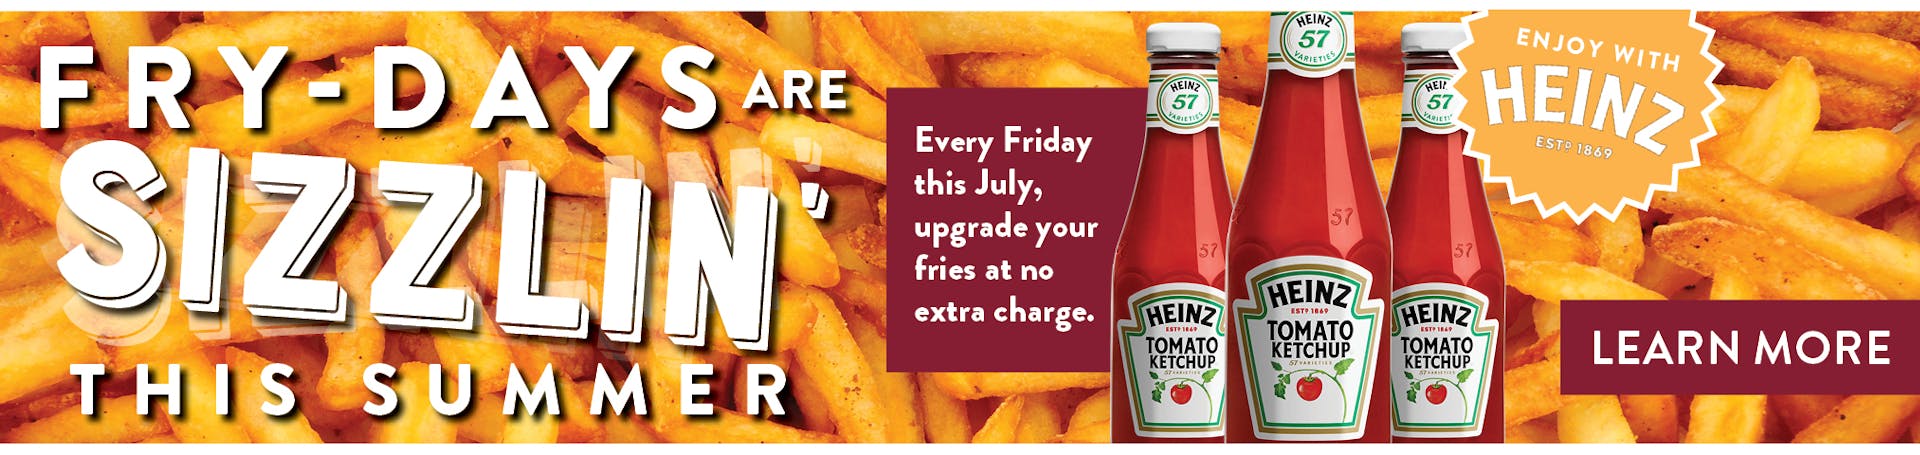 Fry-Days are sizzlin' this summer. Every Friday this July, upgrade your fries at no extra charge. Image of Fries and Heinz Ketchup bottles.